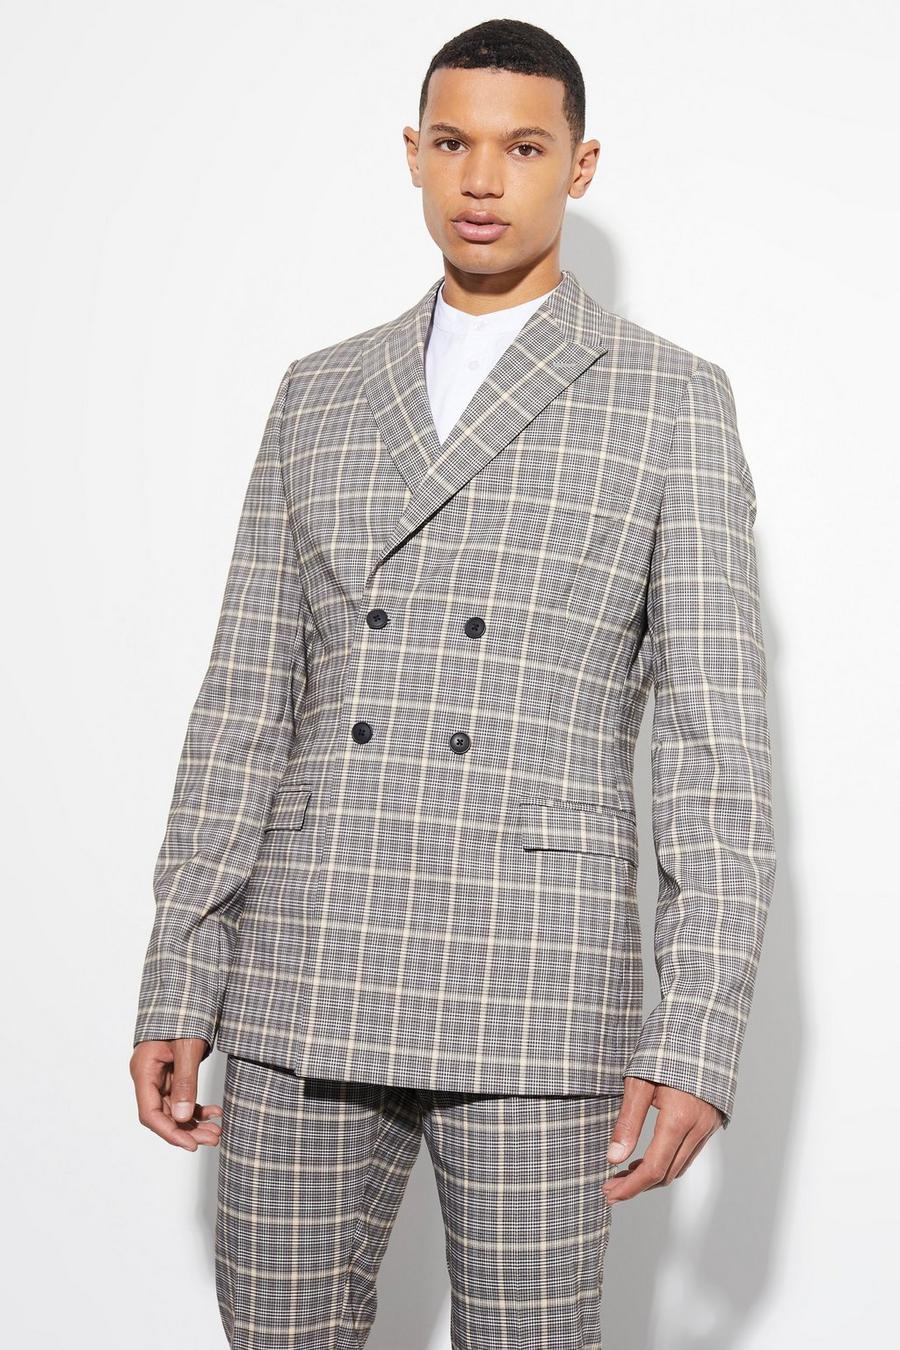 Black Tall Skinny Double Breasted Check Suit Jacket